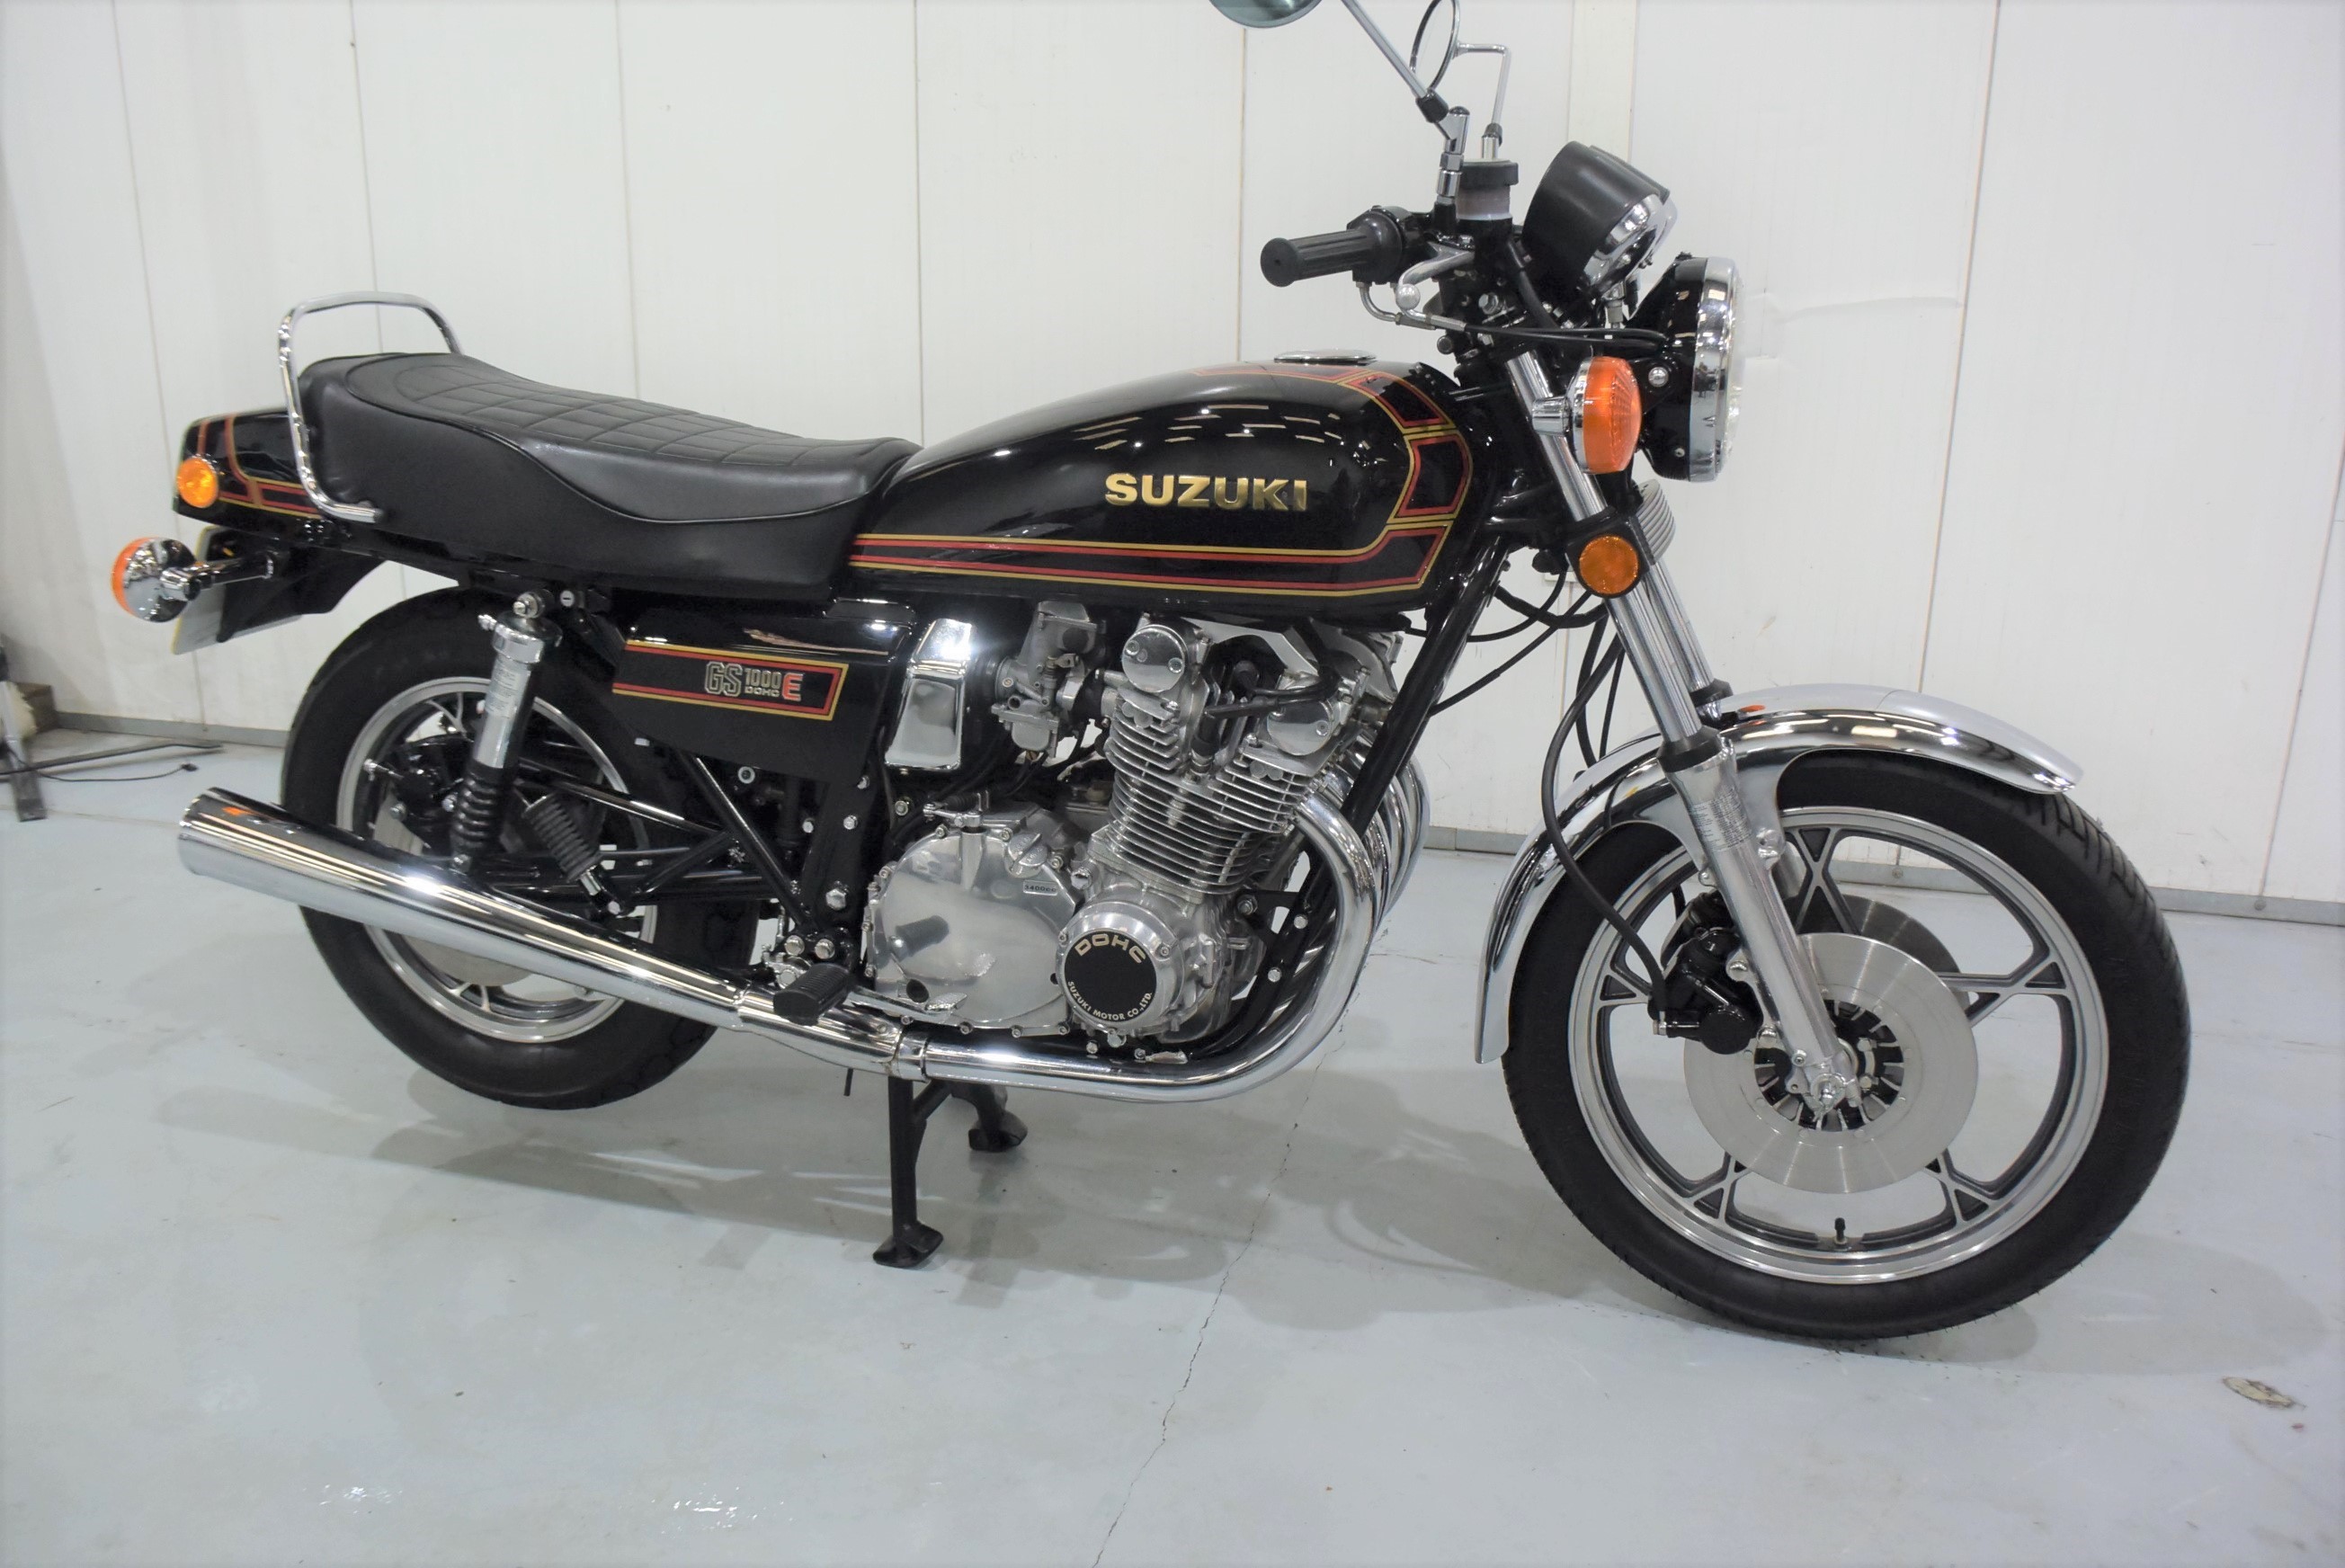 Suzuki GS1000 for sale H&H Classics Motorcycle Auction 27th October